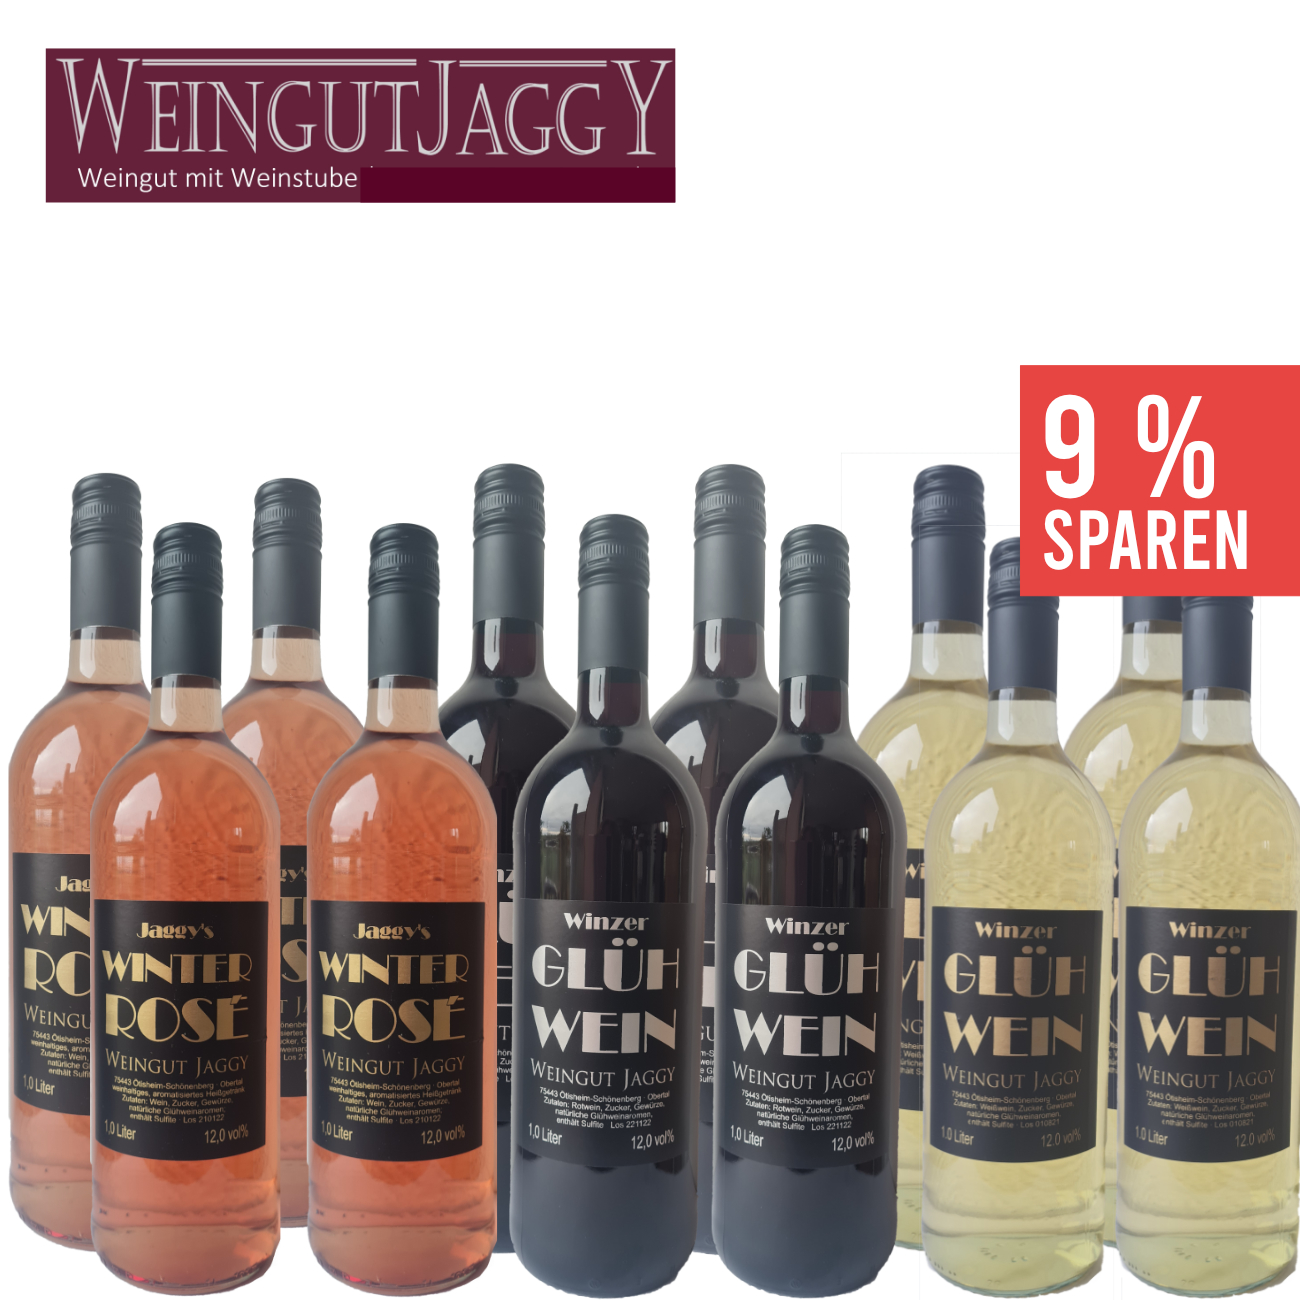 | find+buy of members The our find+buy: wein.plus wein.plus wines